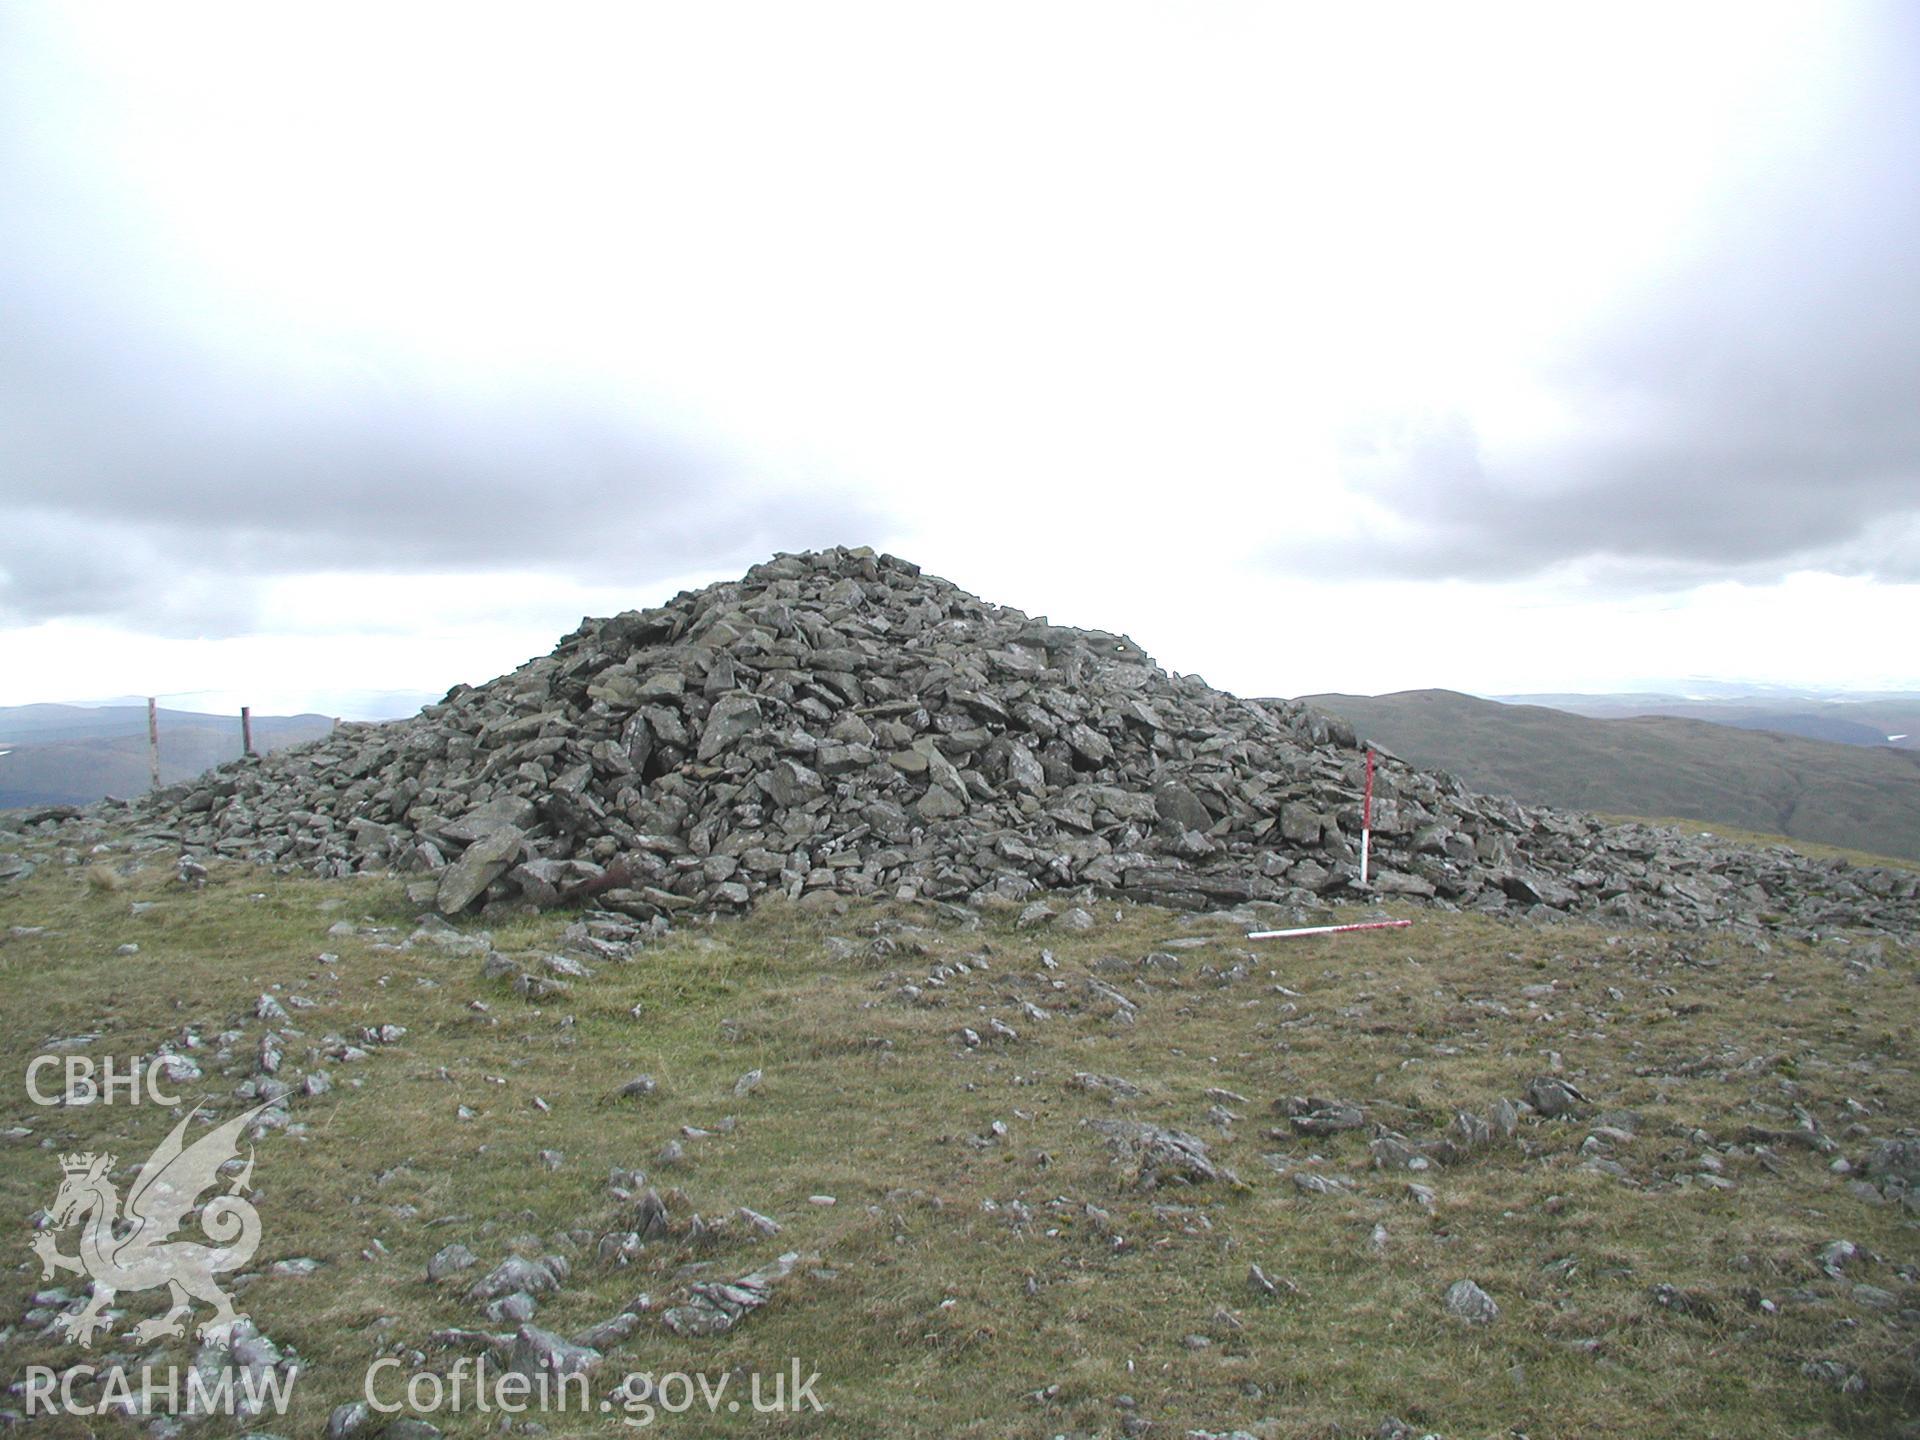 Photograph of the southern cairn on Pen Plynlimon Fawr taken on 18/10/2004 by R.S. Jones during an Upland Survey undertaken by Cambrian Archaeological Projects.